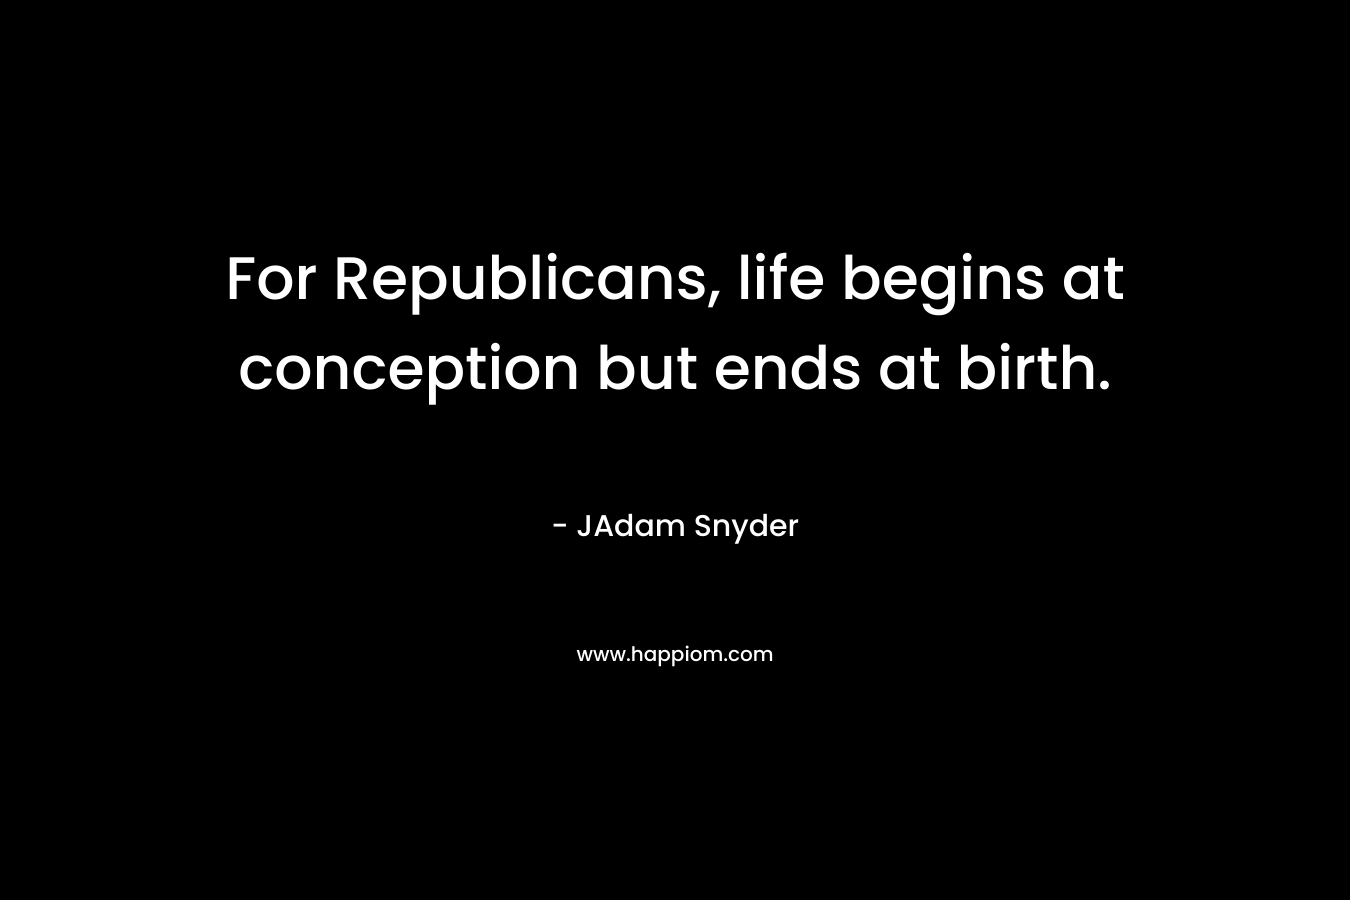 For Republicans, life begins at conception but ends at birth.